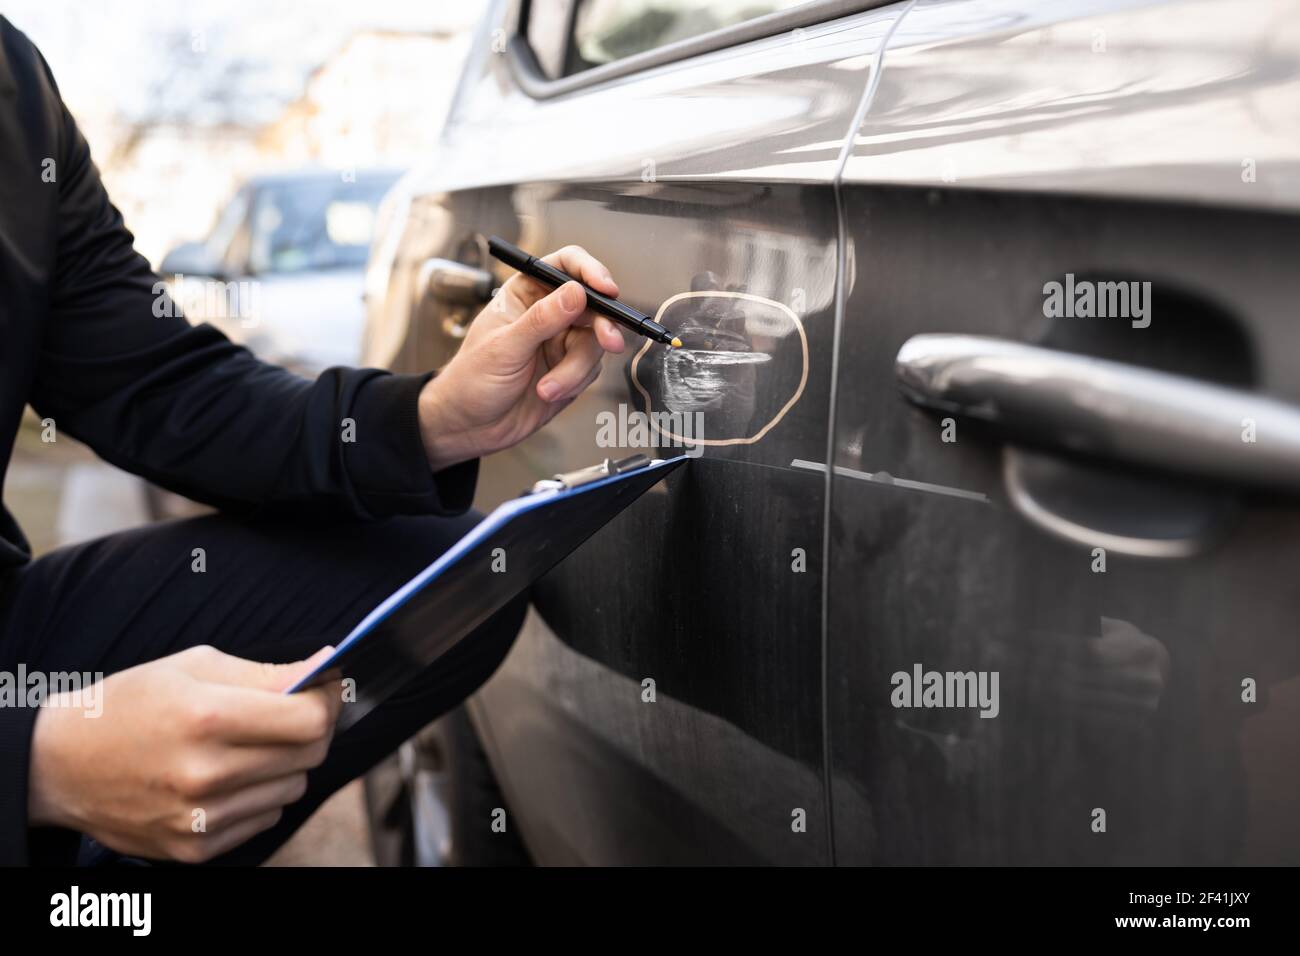 Insurance Agent Or Adjuster Inspecting Car After Accident Stock Photo